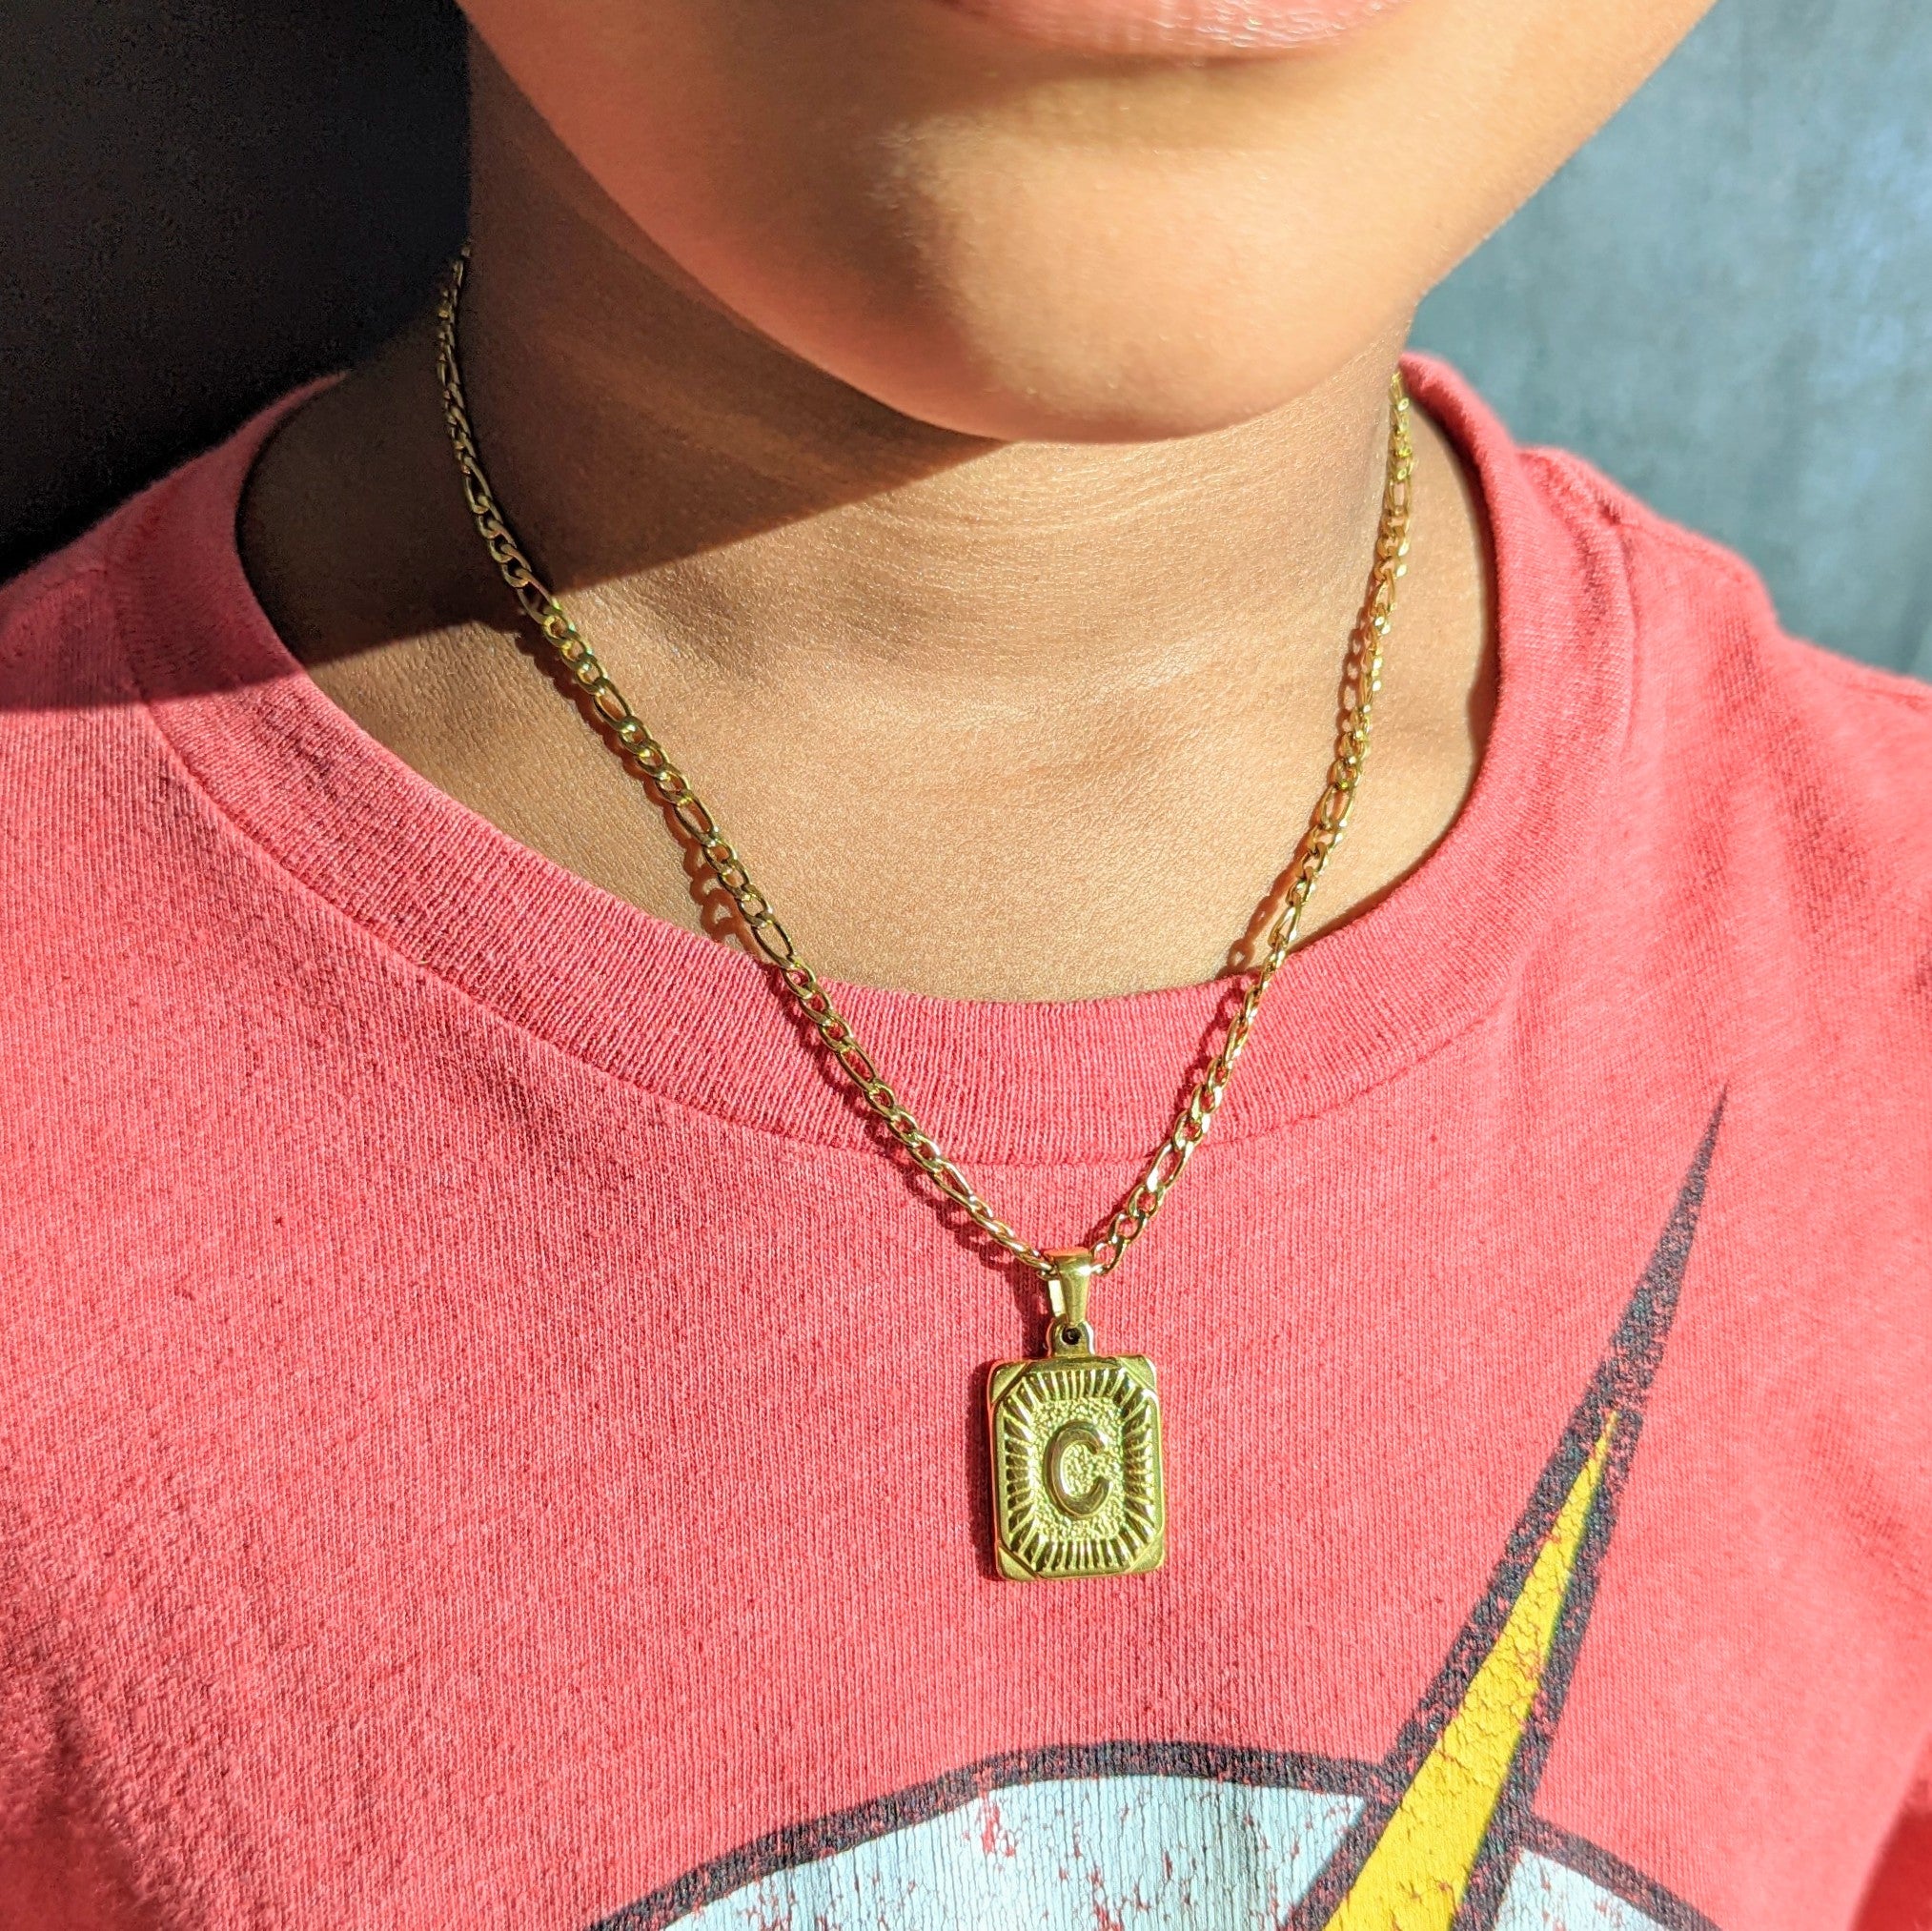 Buy Kid Initial Necklace Online In India - Etsy India